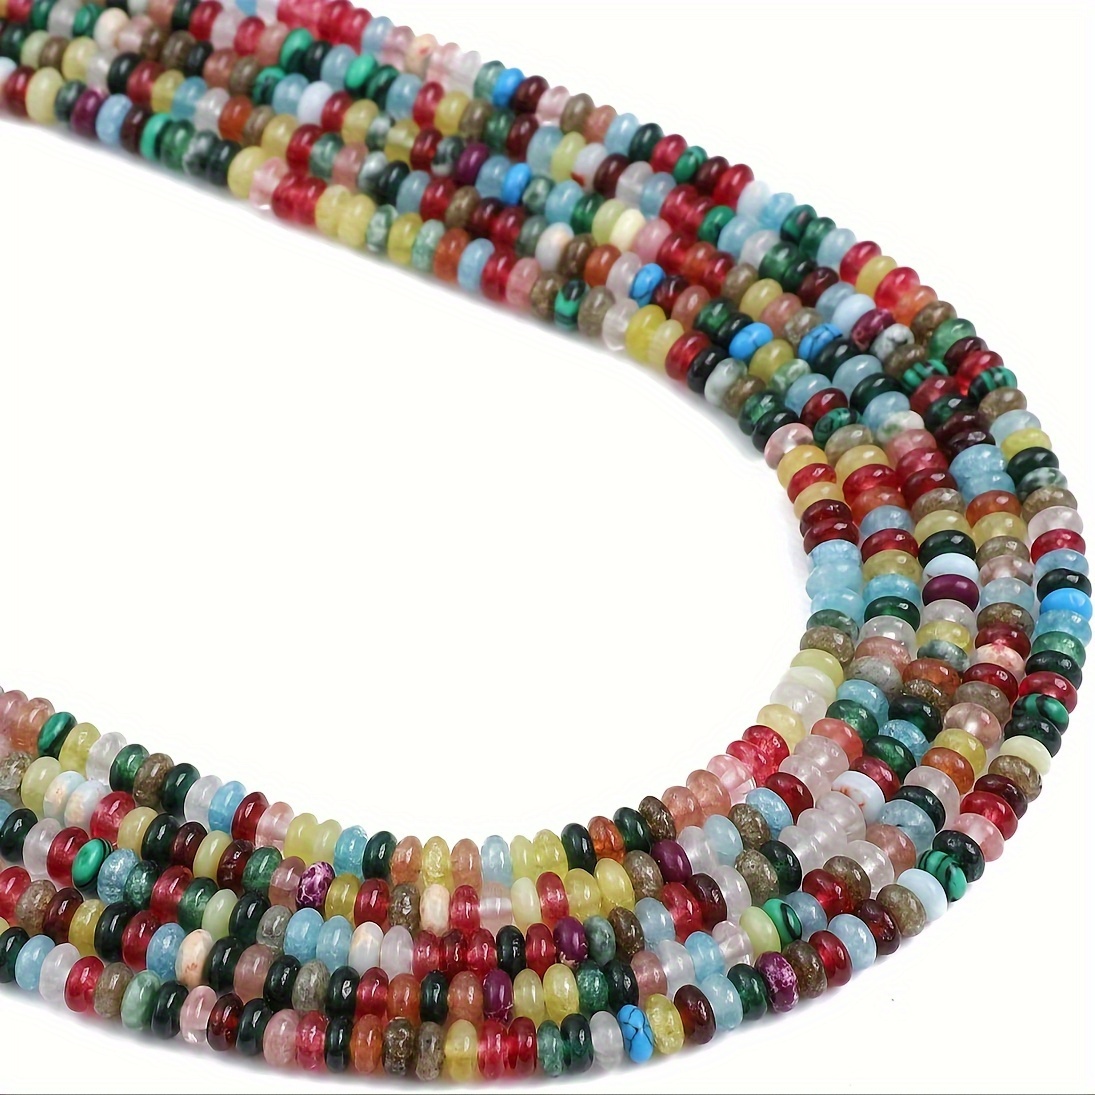 

150pcs Natural Stone Beads Mix Colored Stone Spacer Beads Disk Loose Beads For Beading Jewelry Making